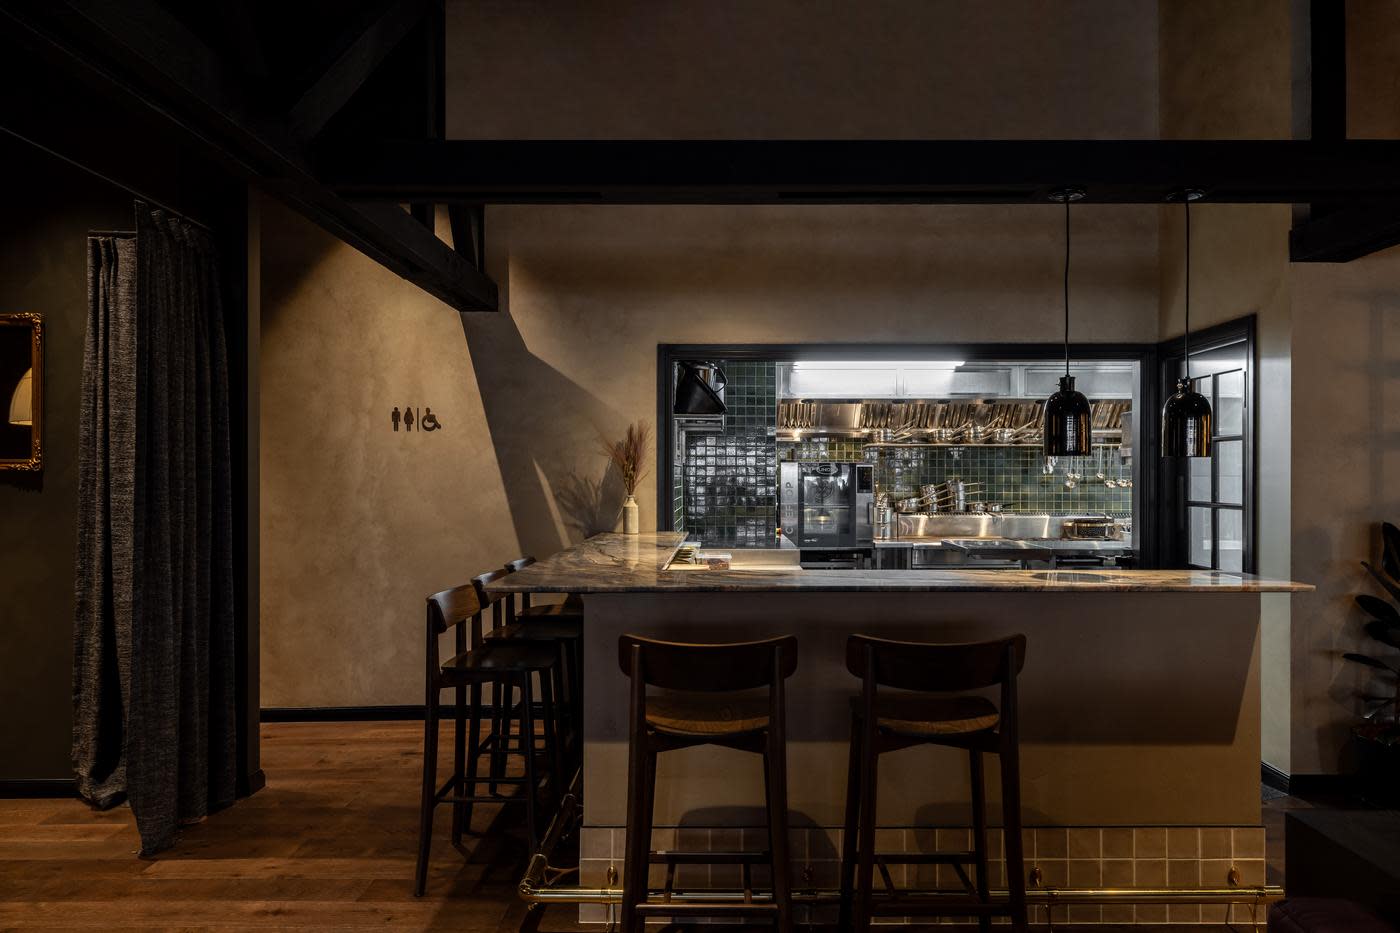 Inside setting of a dark and moody wine bar and restaurant with the kitchen pass in the background